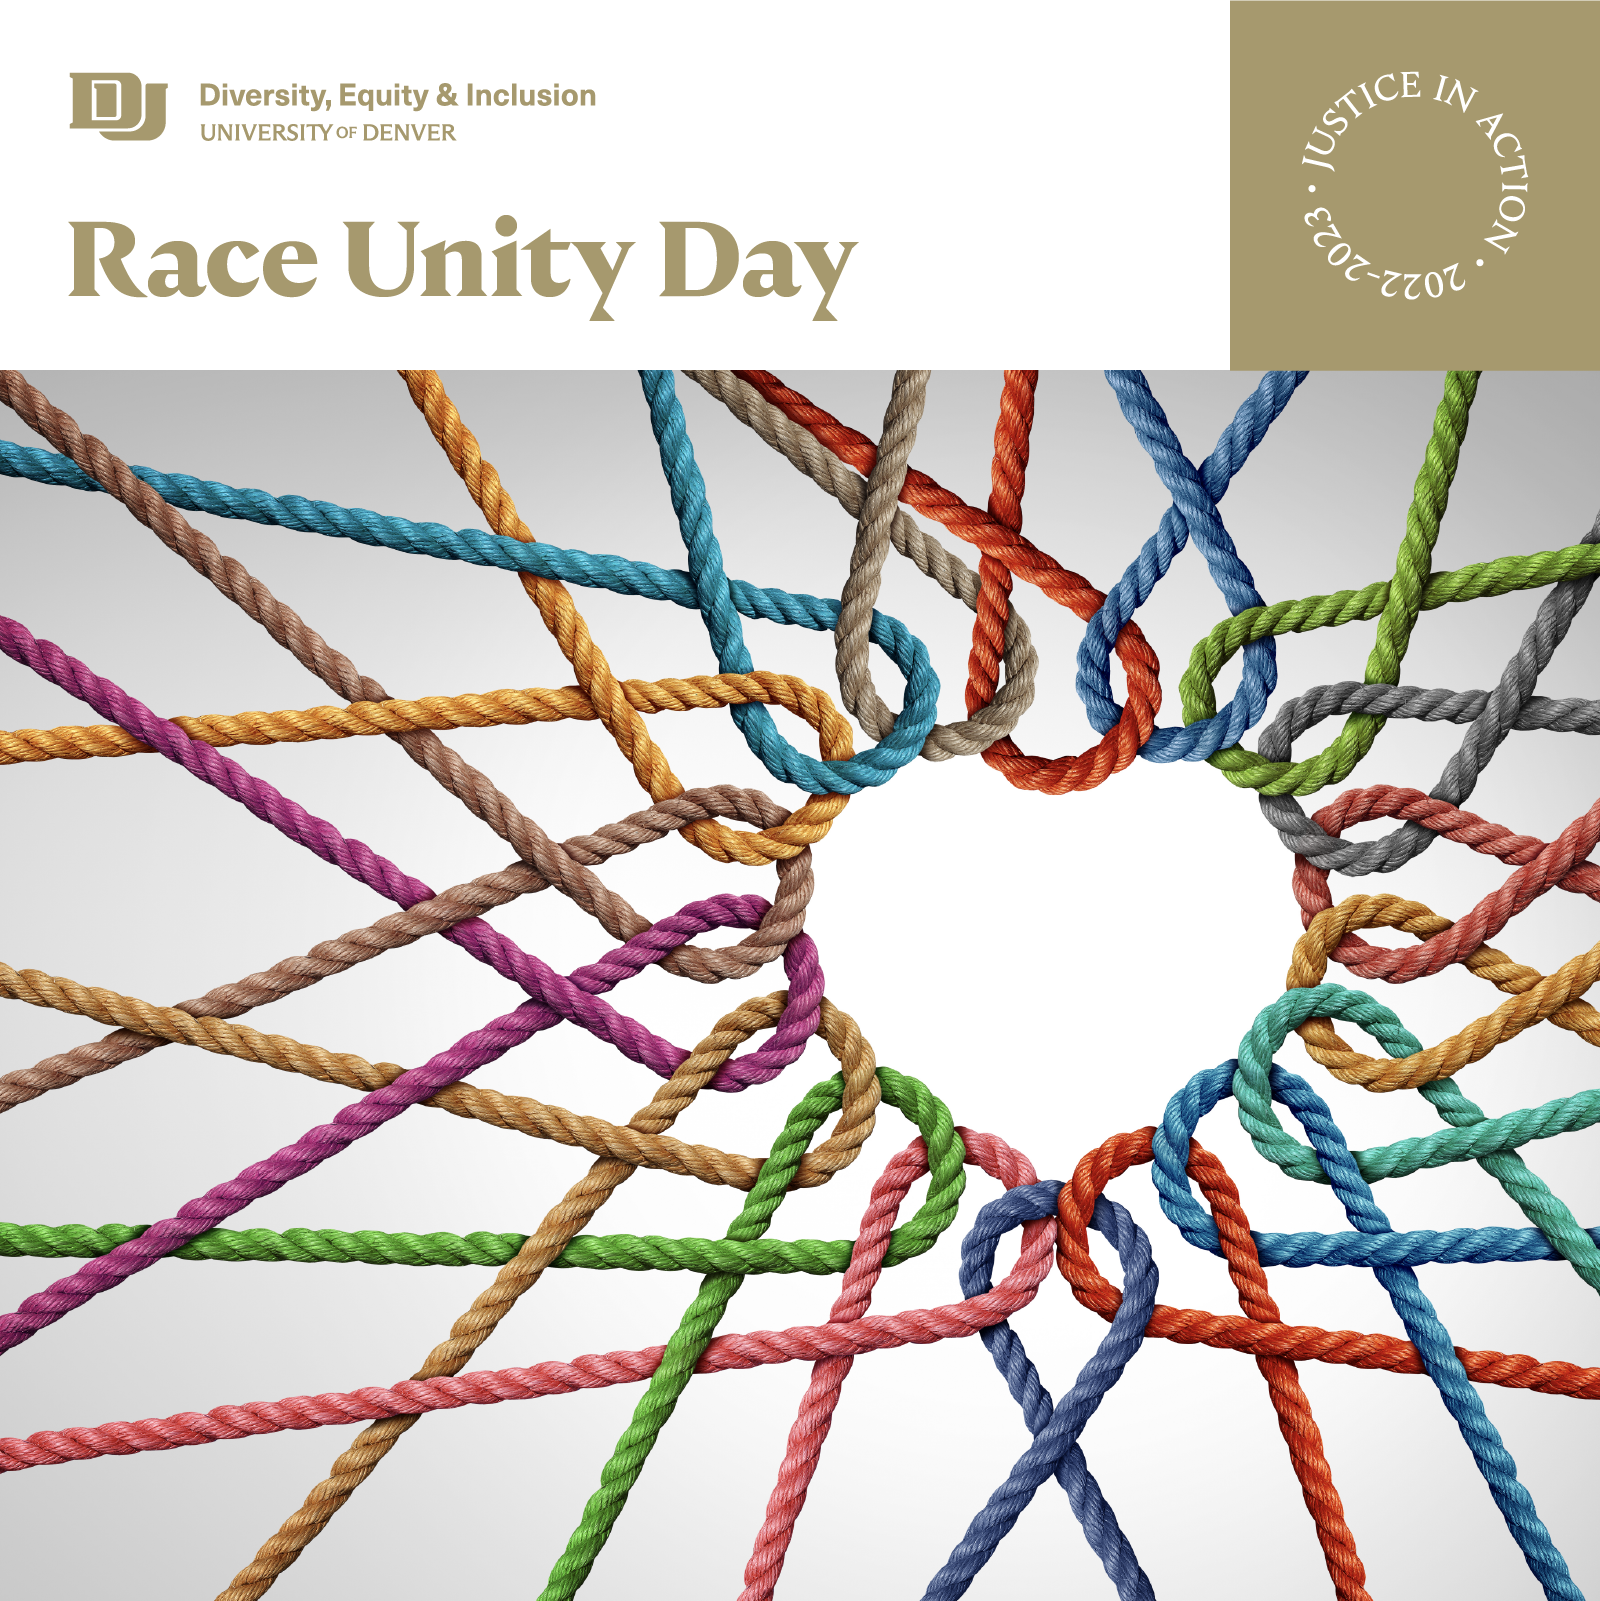 Race Unity Day Graphic; a heart made up of multiple colored ropes